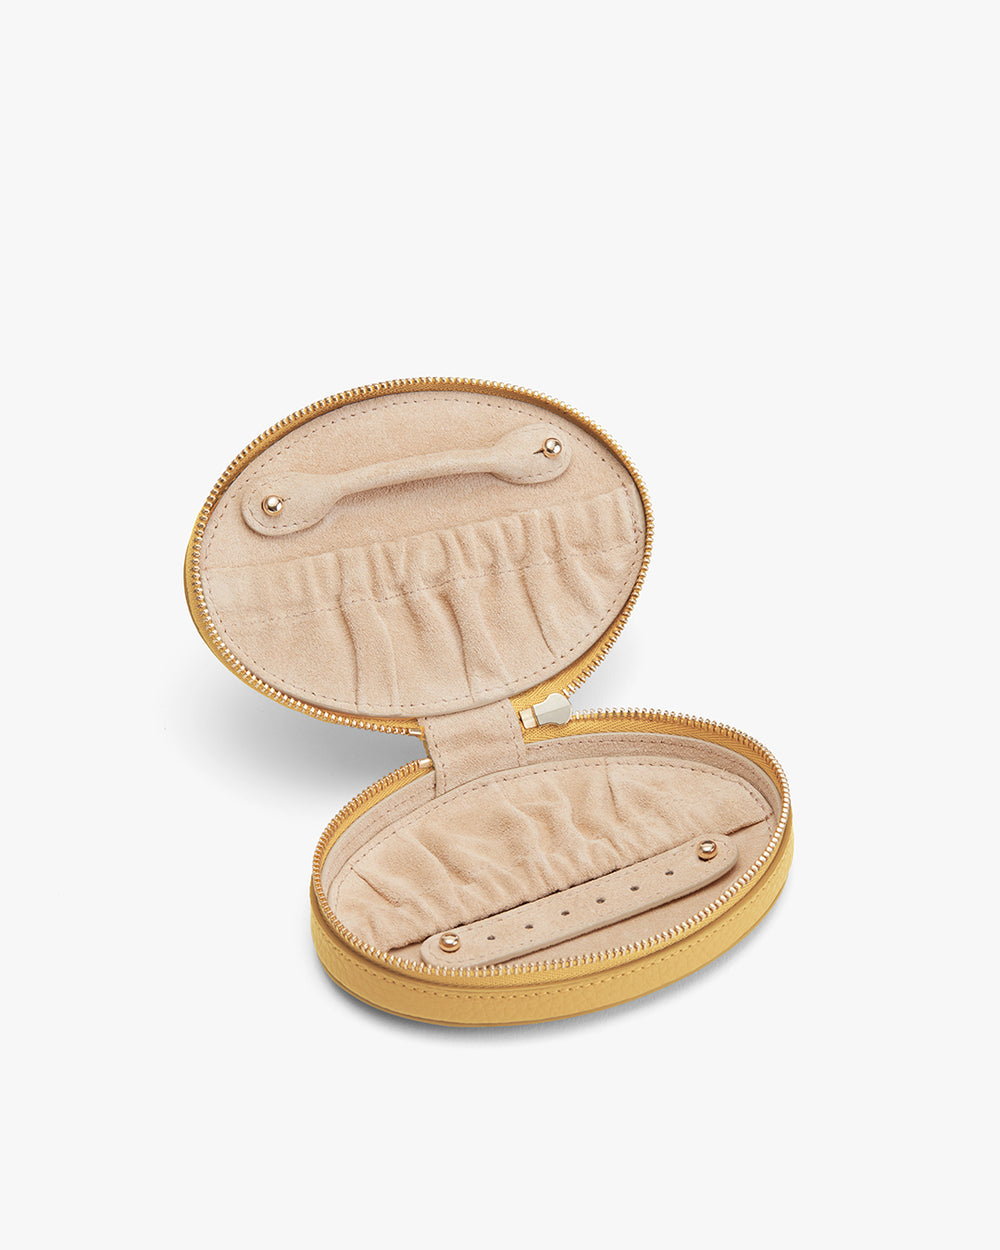 Open oval-shaped small zippered case with interior compartments.